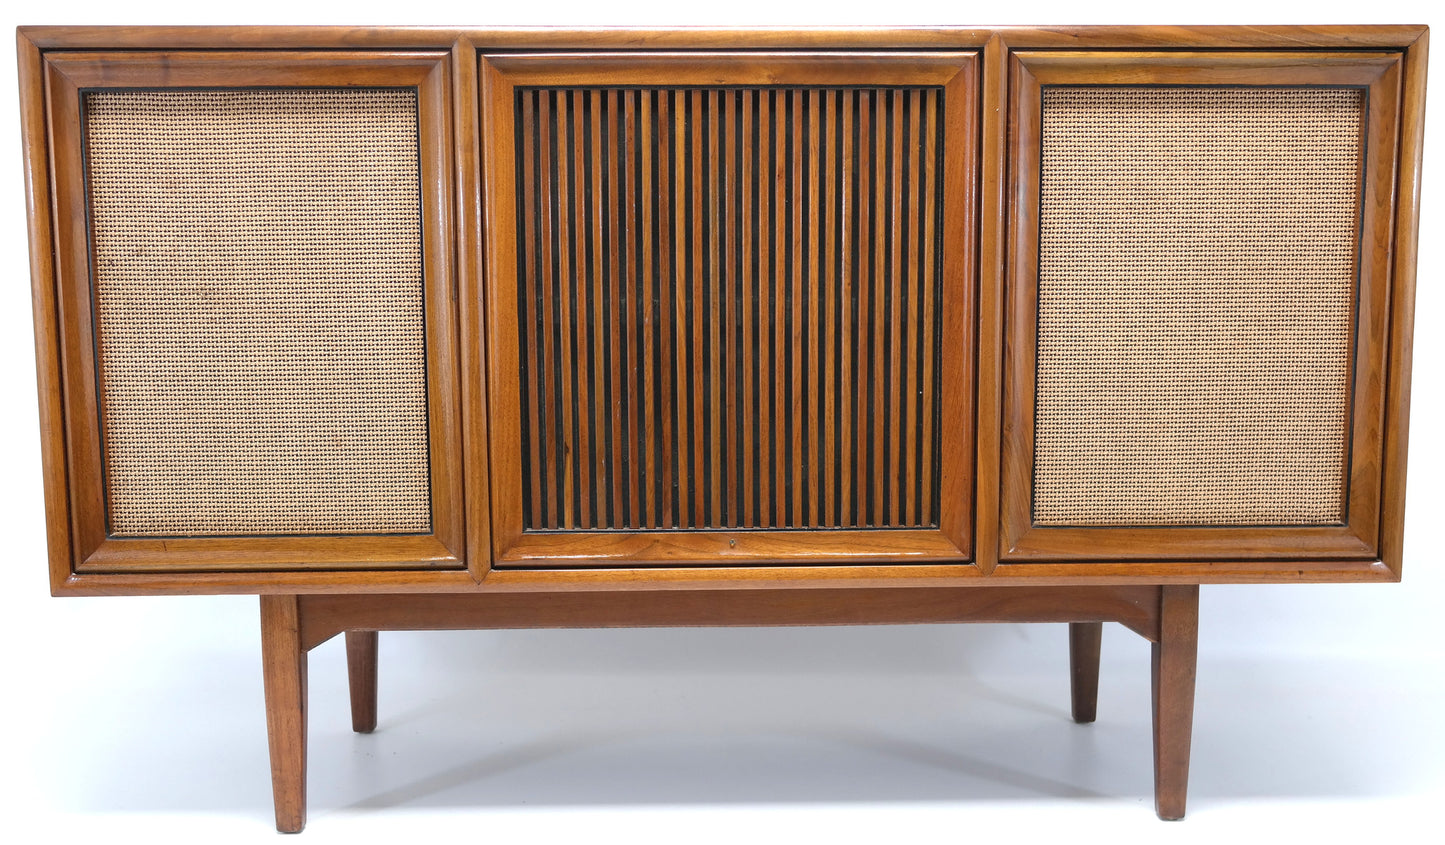 Mid Century Modern Motorola STEREO CONSOLE- 60's - Record Player - Bluetooth - AM FM Tuner The Vintedge Co.